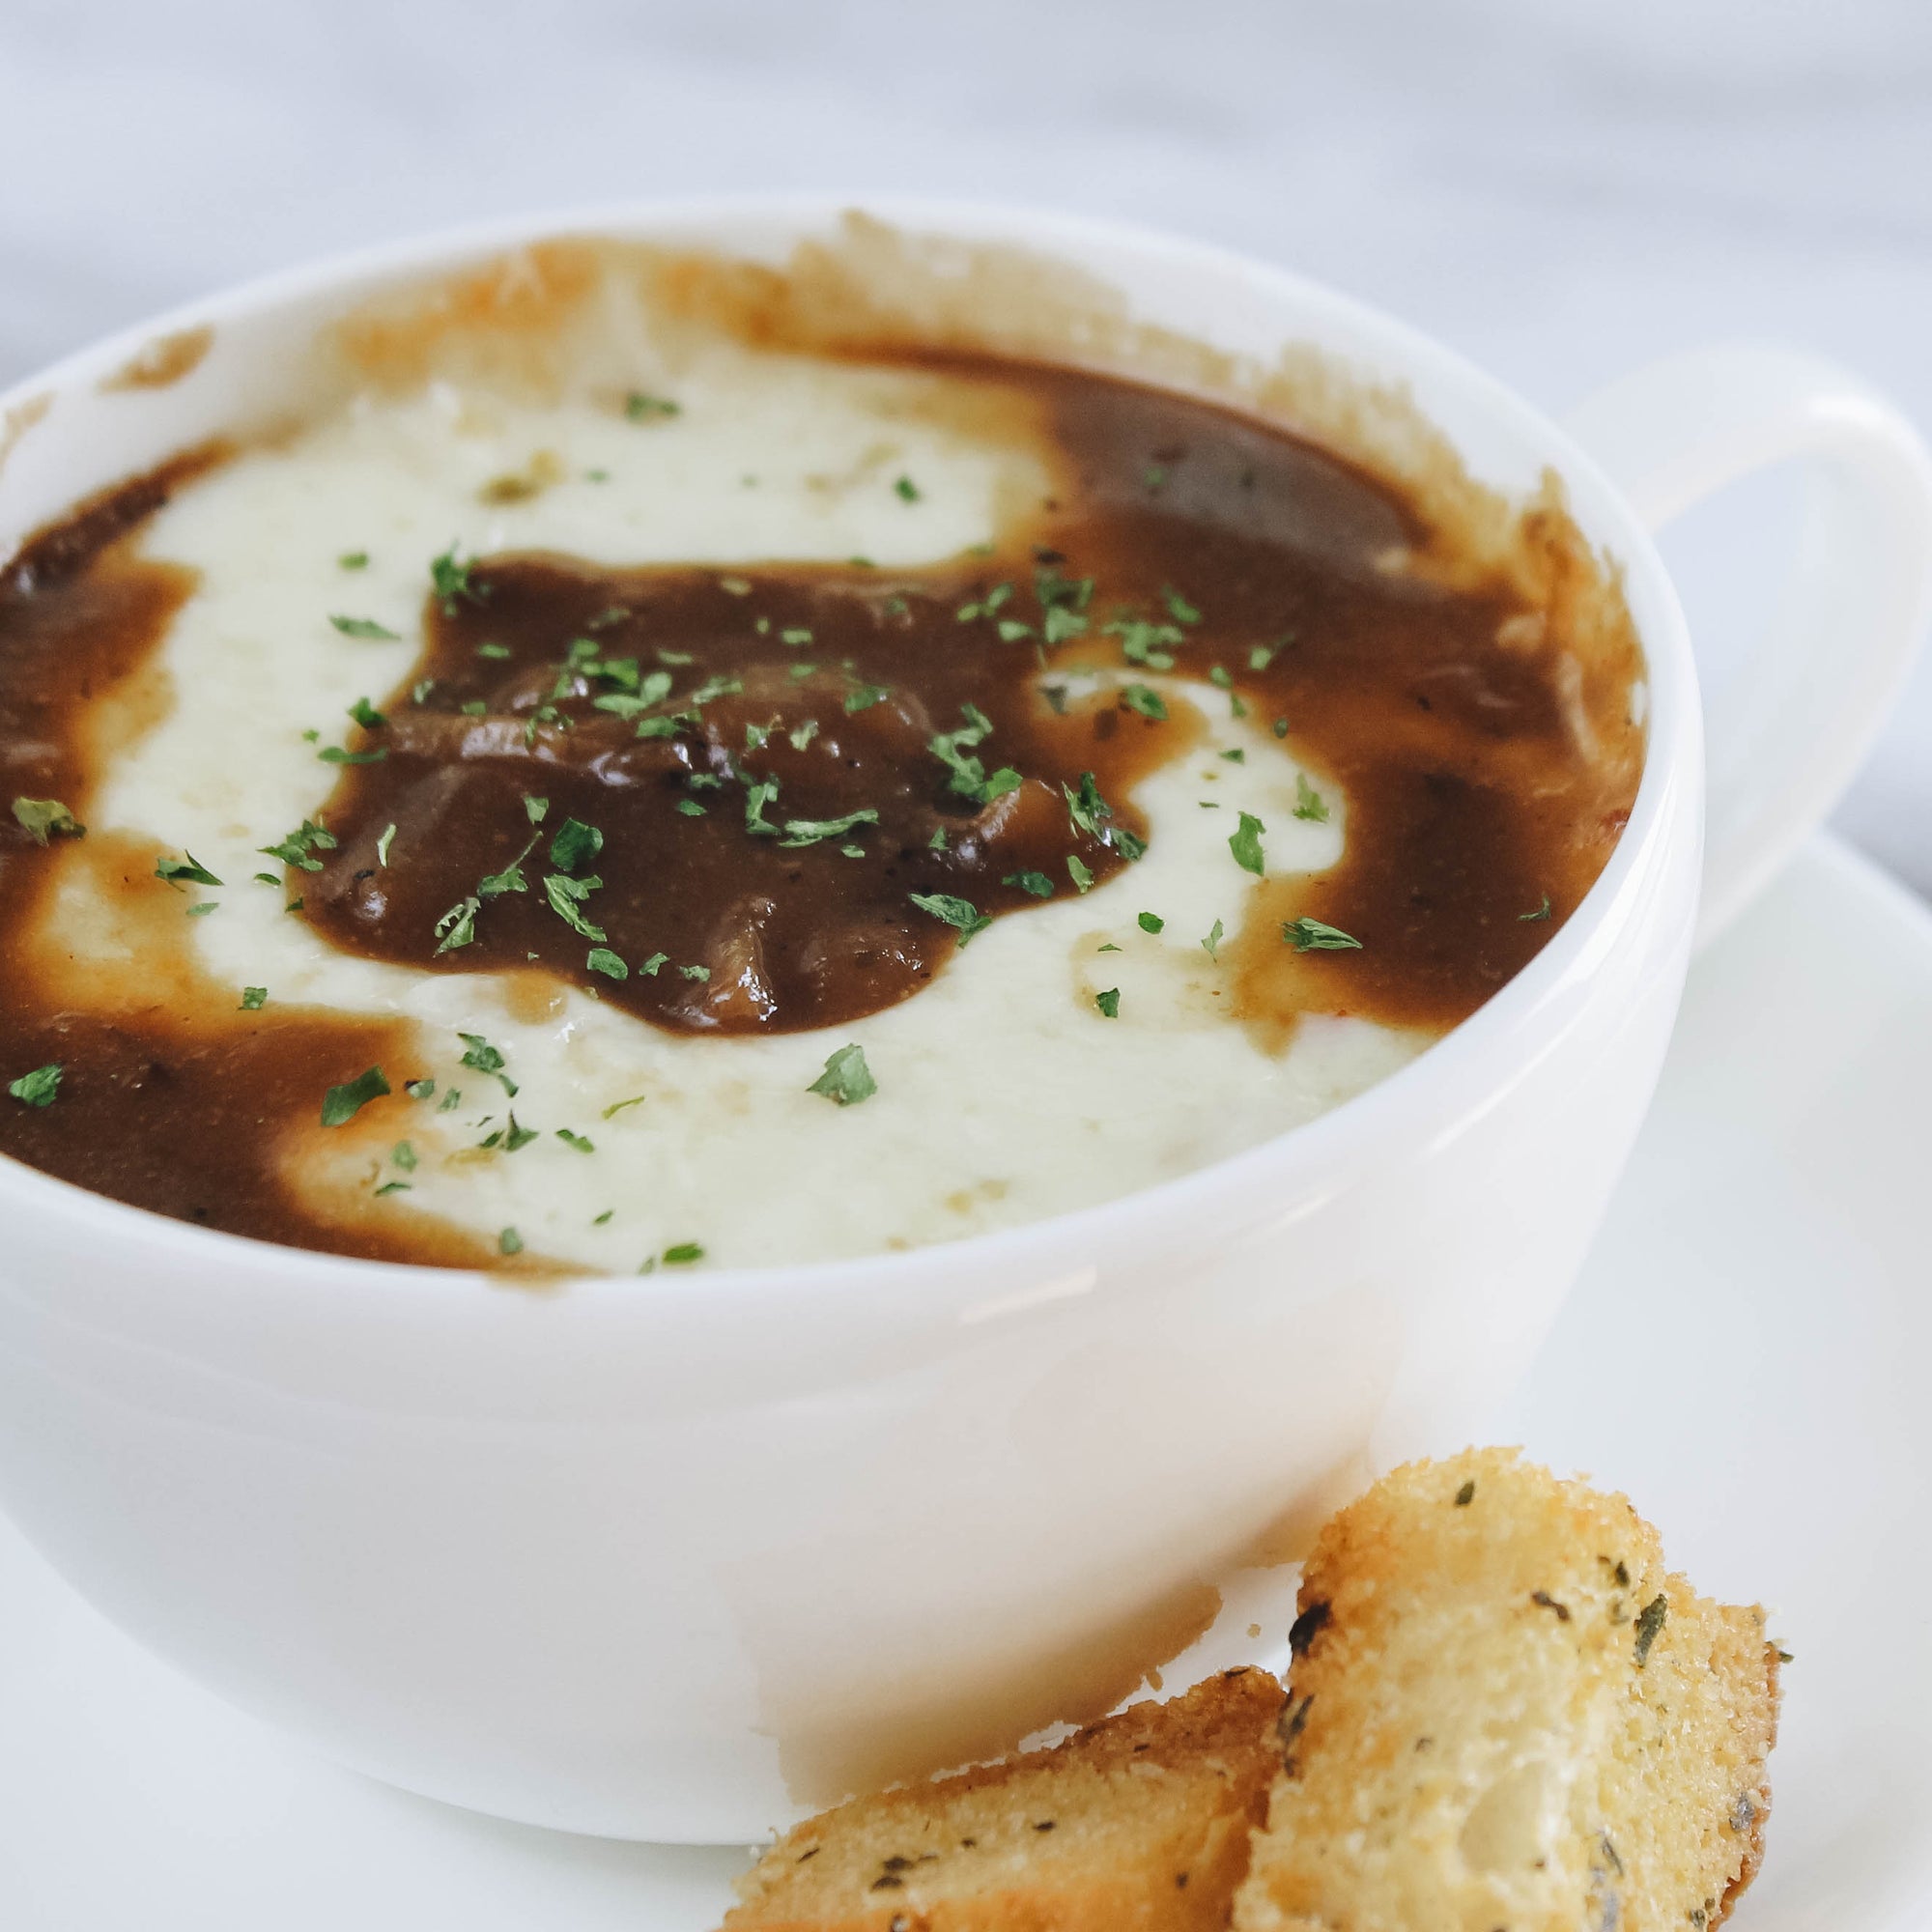 Cajun french onion soup recipe with melted cheese topped with parsley and croutons using The Cajun Spoon Brown Gravy Cajun Seasoning product